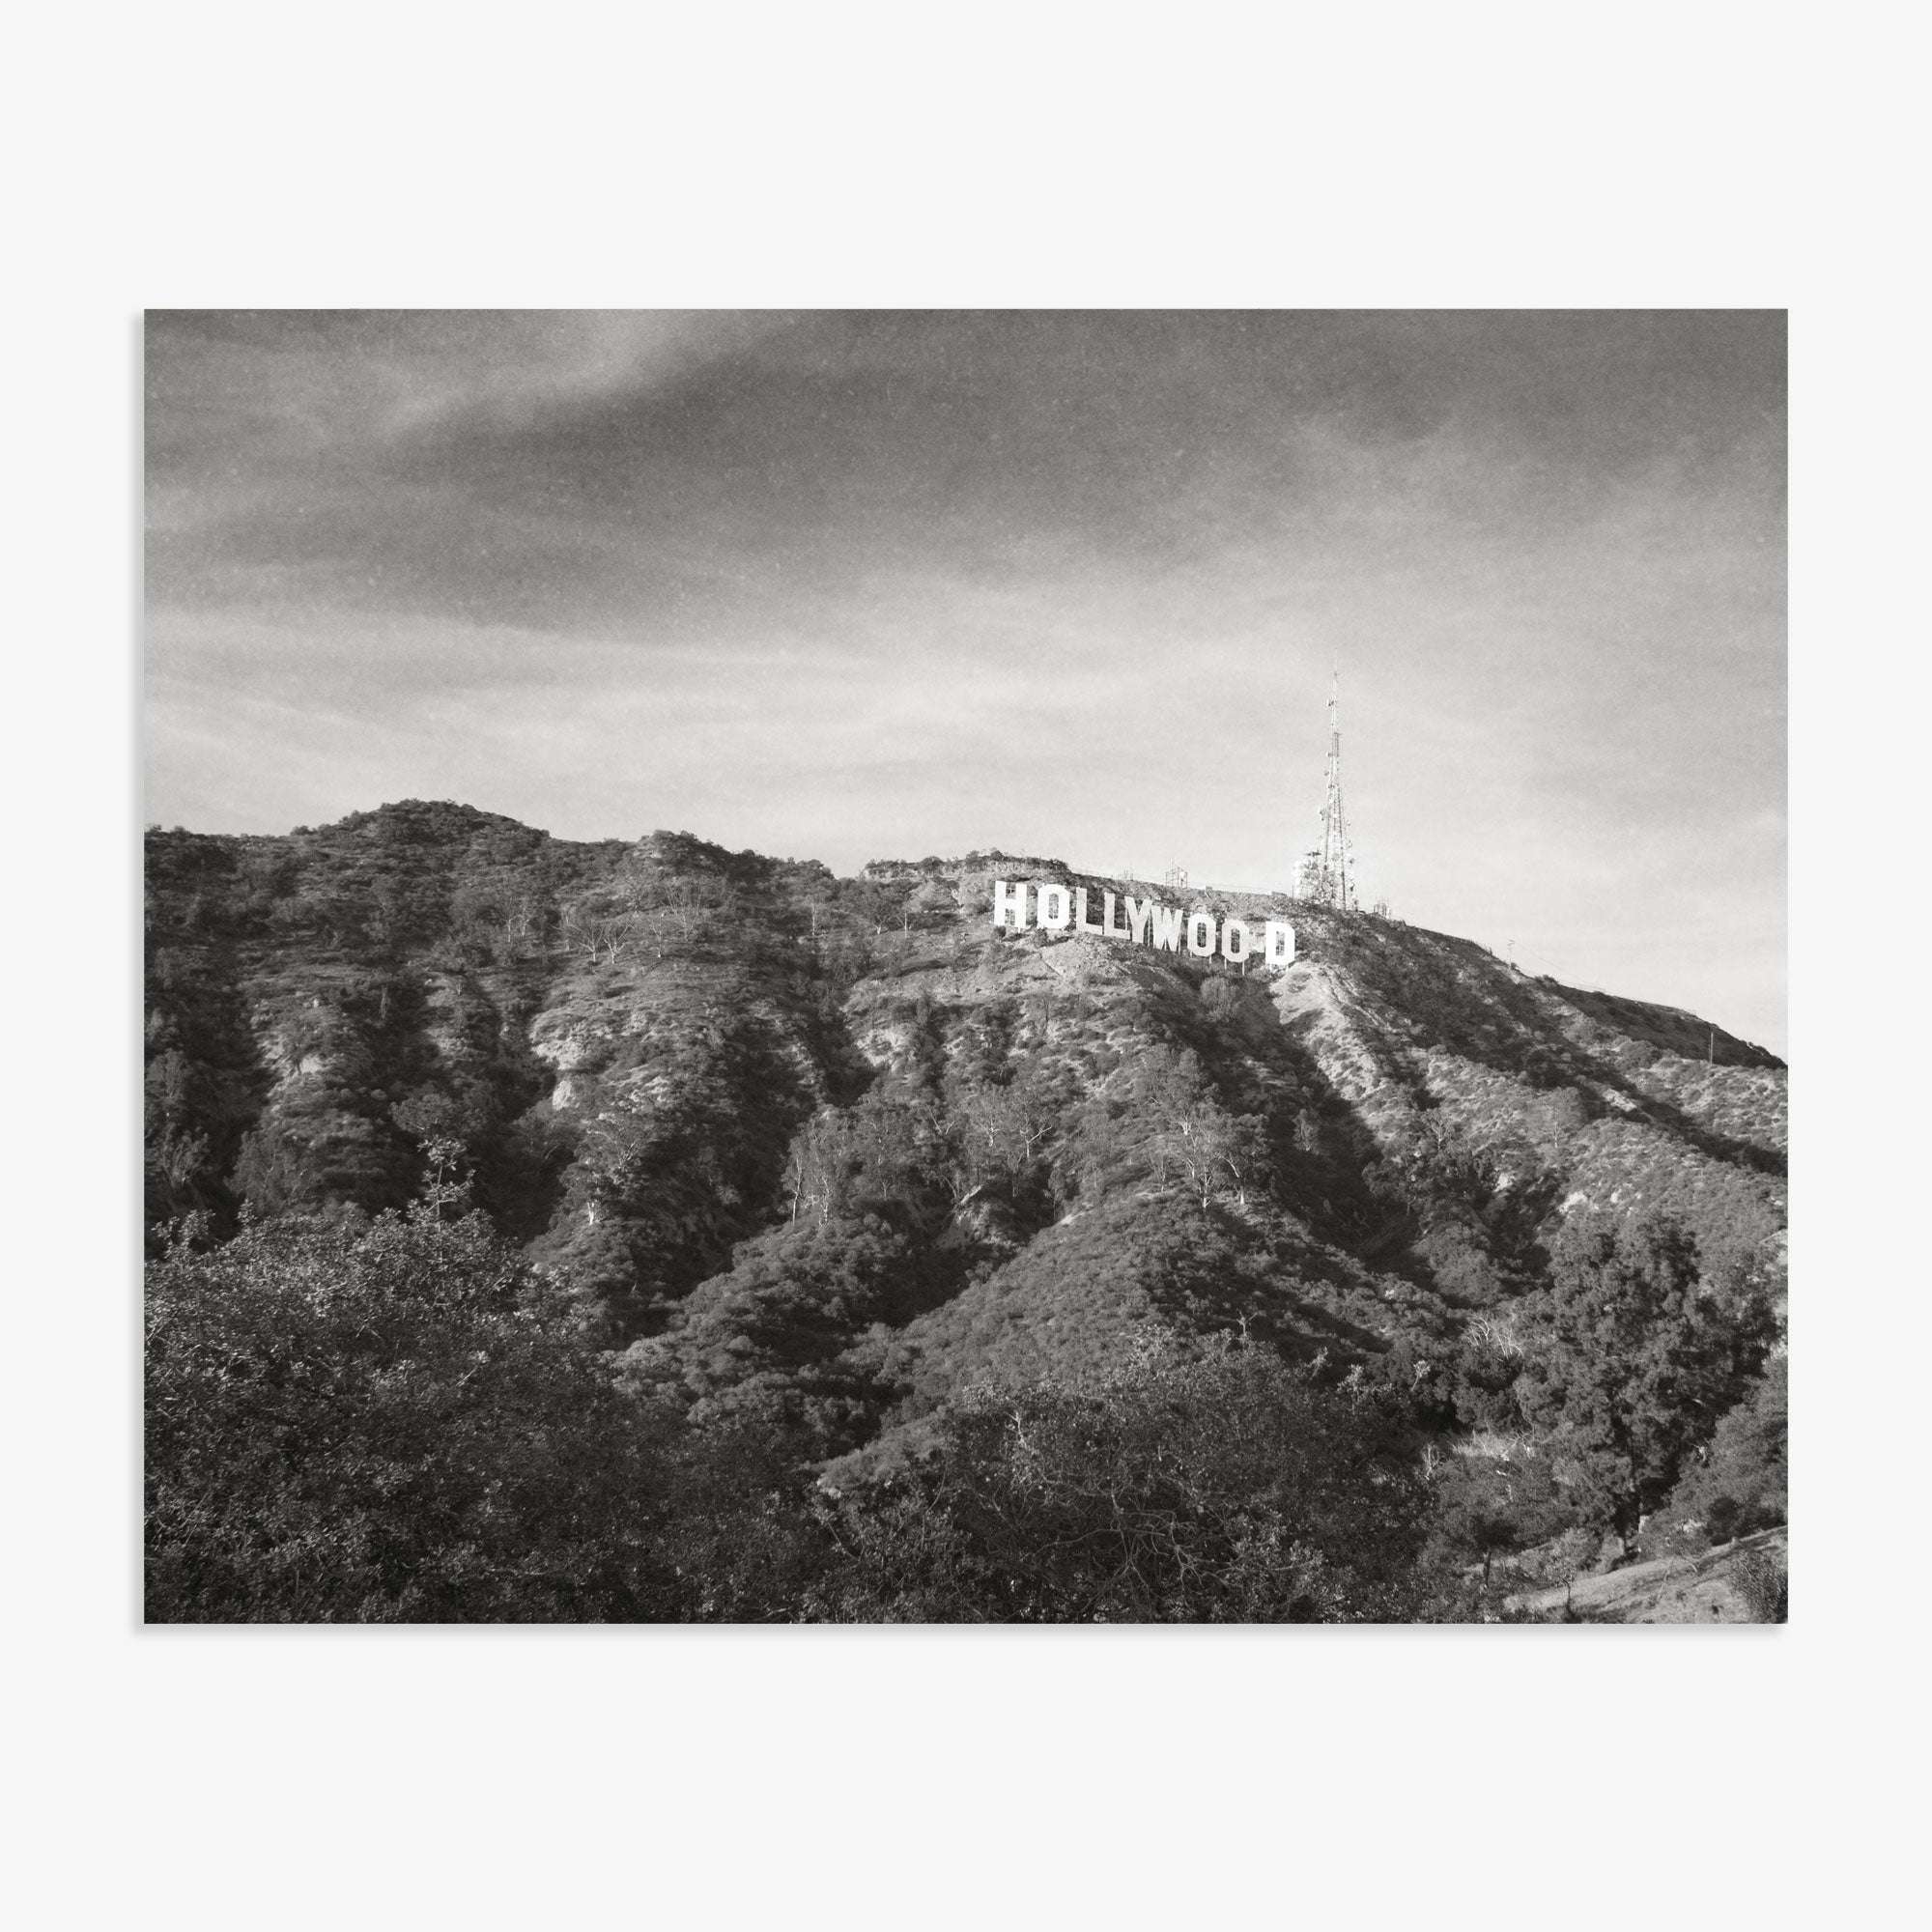 Black and white photograph of the Hollywood Sign Black and White Vintage Print, &#39;Old Hollywood&#39; on a hill, printed on archival photographic paper, with textured clouds above and lush foliage covering the slopes by Offley Green.